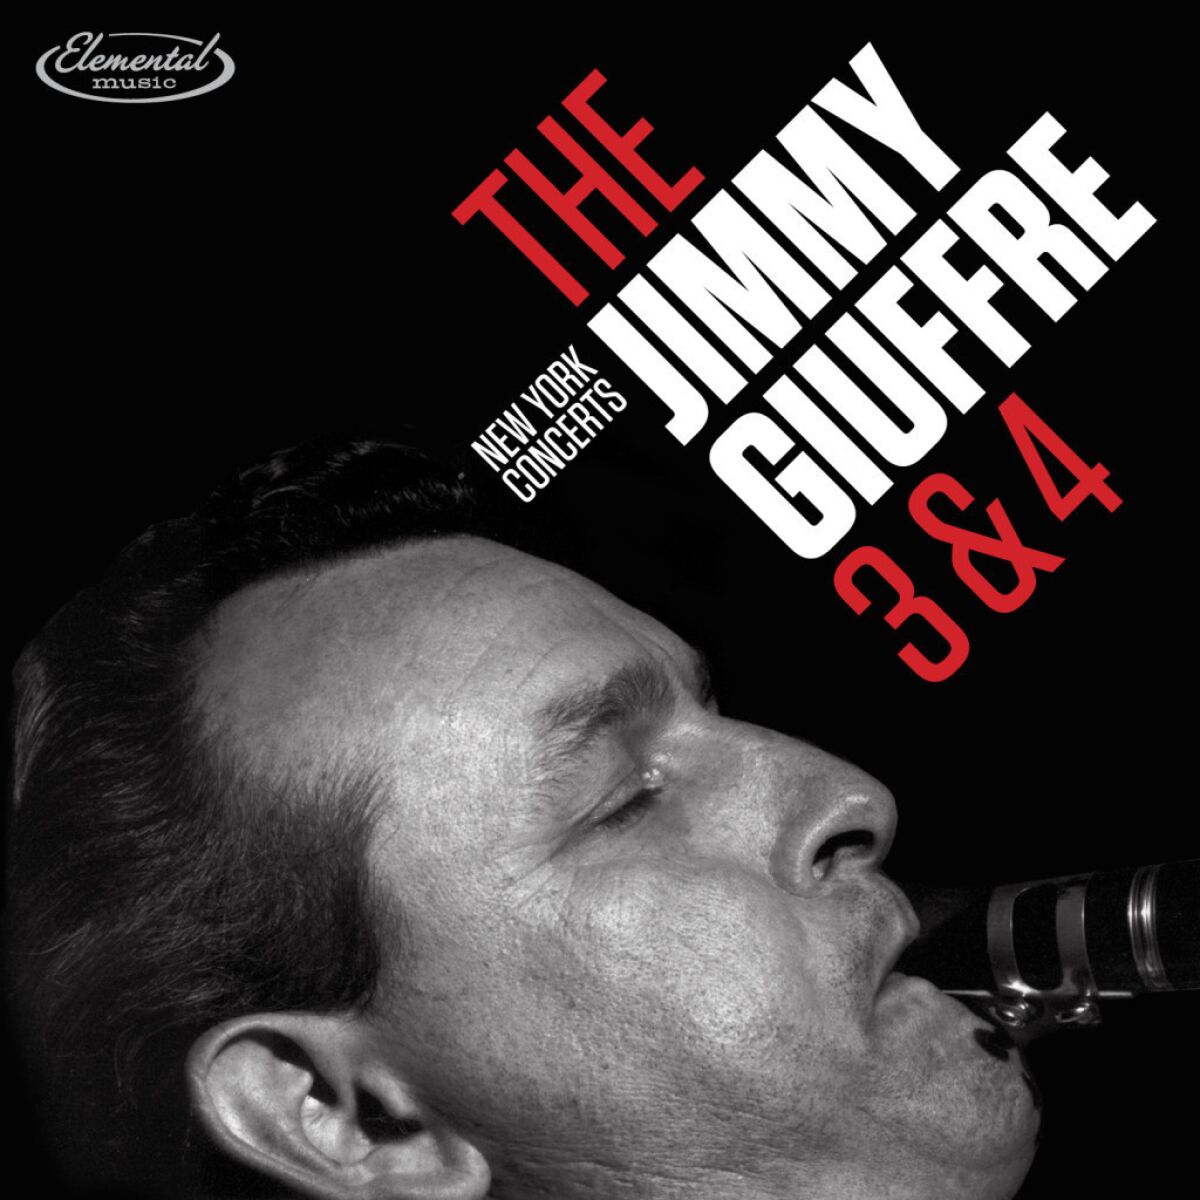 Splitting time between clarinet and tenor saxophone, Guiffre was a lesser known yet still influential figure in jazz up to his death in 2008. This year may bring a welcome lift to his profile with the rich, Guiffre-inspired "Riverside" album from trumpeter Dave Douglas and "The Jimmy Guiffre 3&4: New York Concerts," a bracing, odd-angled live set from 1965 that at times recalls Ornette Coleman with a restless, freewheeling spirit that still sounds ahead of its time.